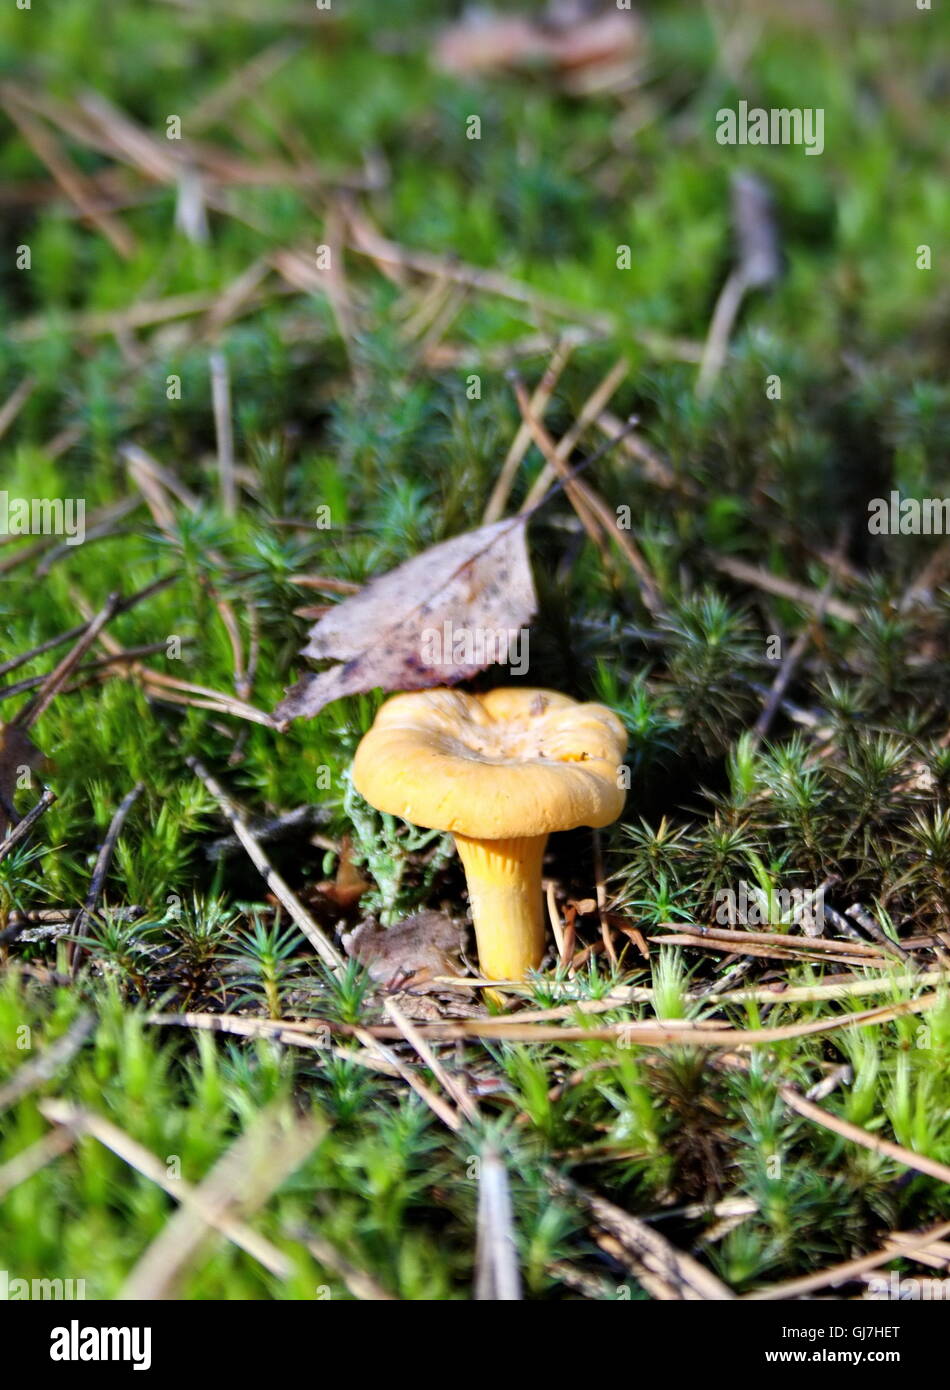 chanterelle mushroom with a leaf in the forest Stock Photo